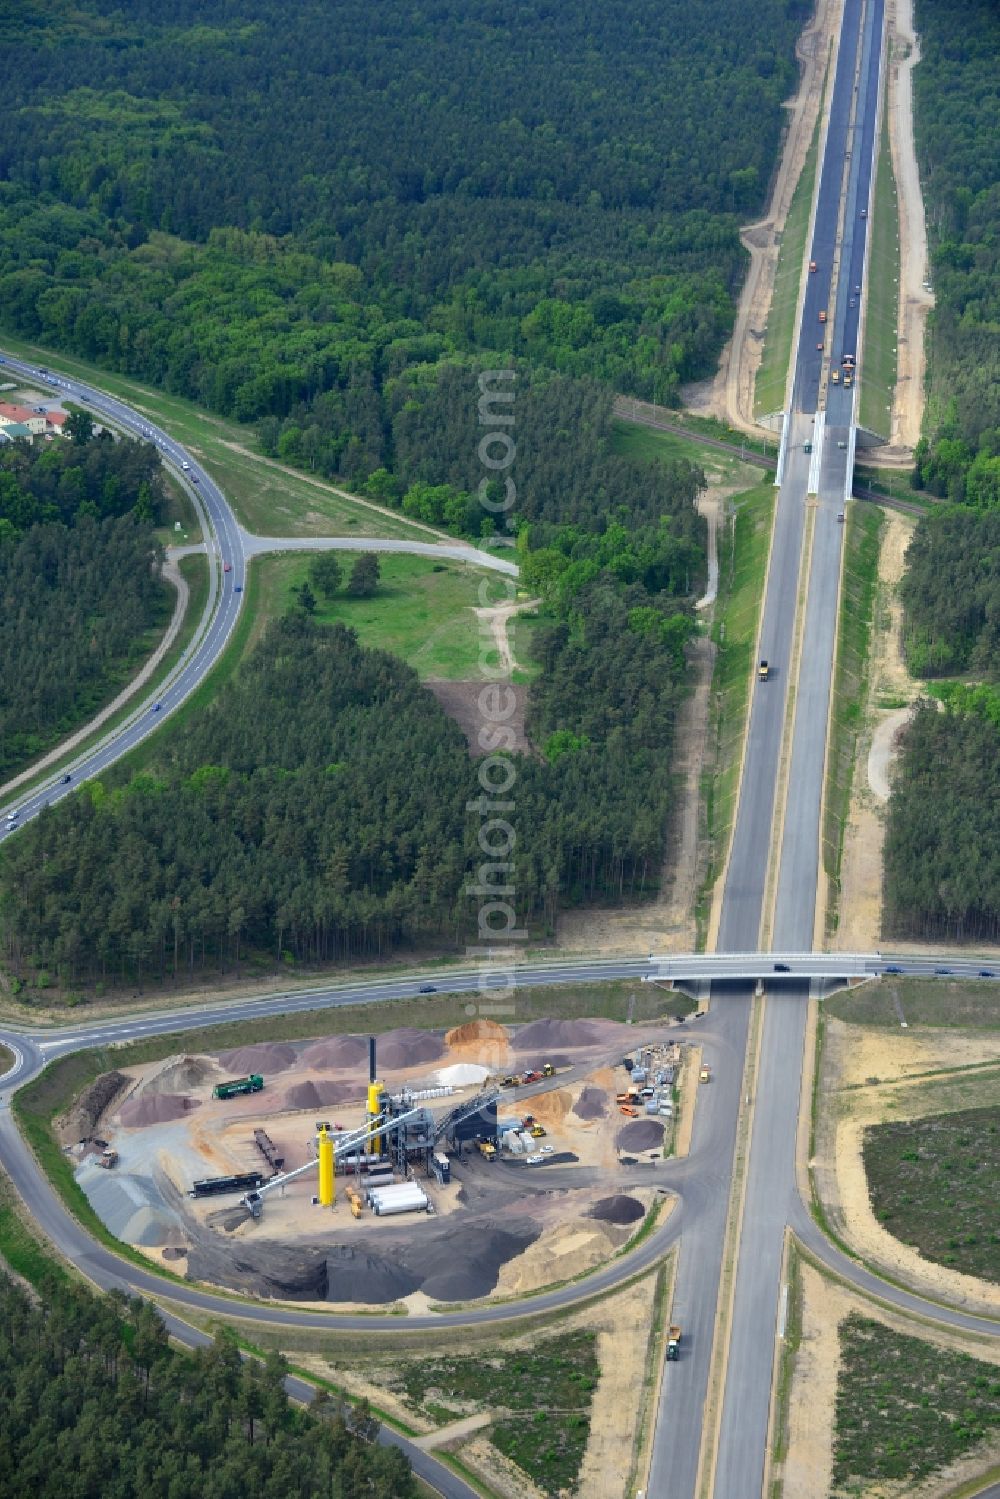 Aerial image Ludwigslust - Bitumen - mixing plant to the driving surface production to the construction site on the traffic flow on the motorway junction of the A14 motorway at exit Ludwigslust in Mecklenburg - Western Pomerania